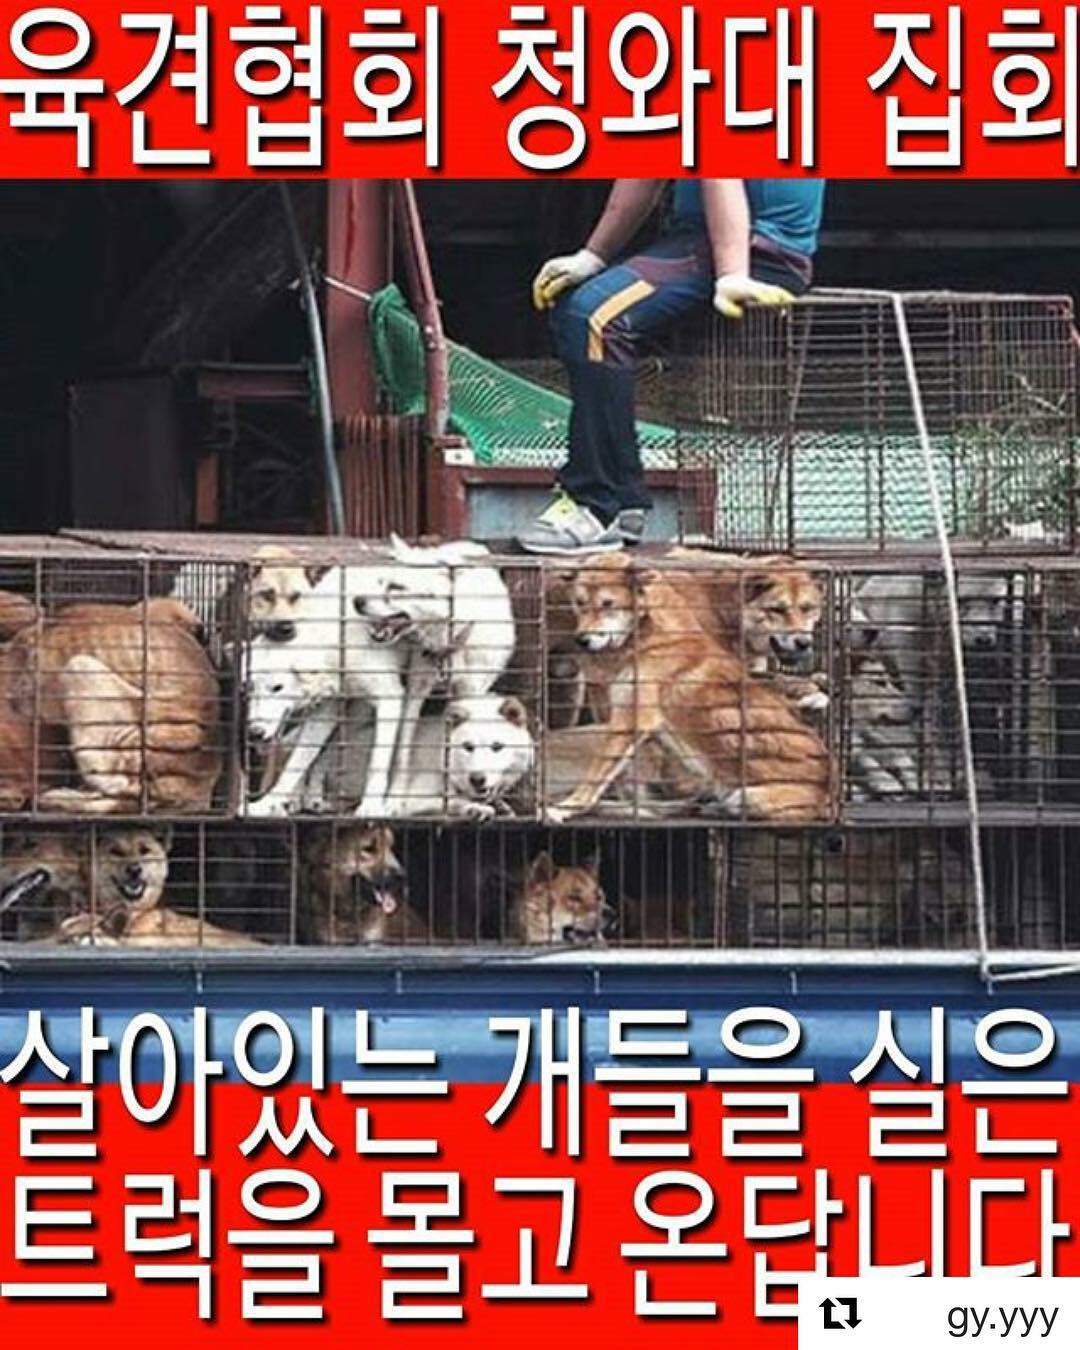 Urgent Call to Action – Stop the Korean Dog Slaughters’ Demonstration in Seoul!